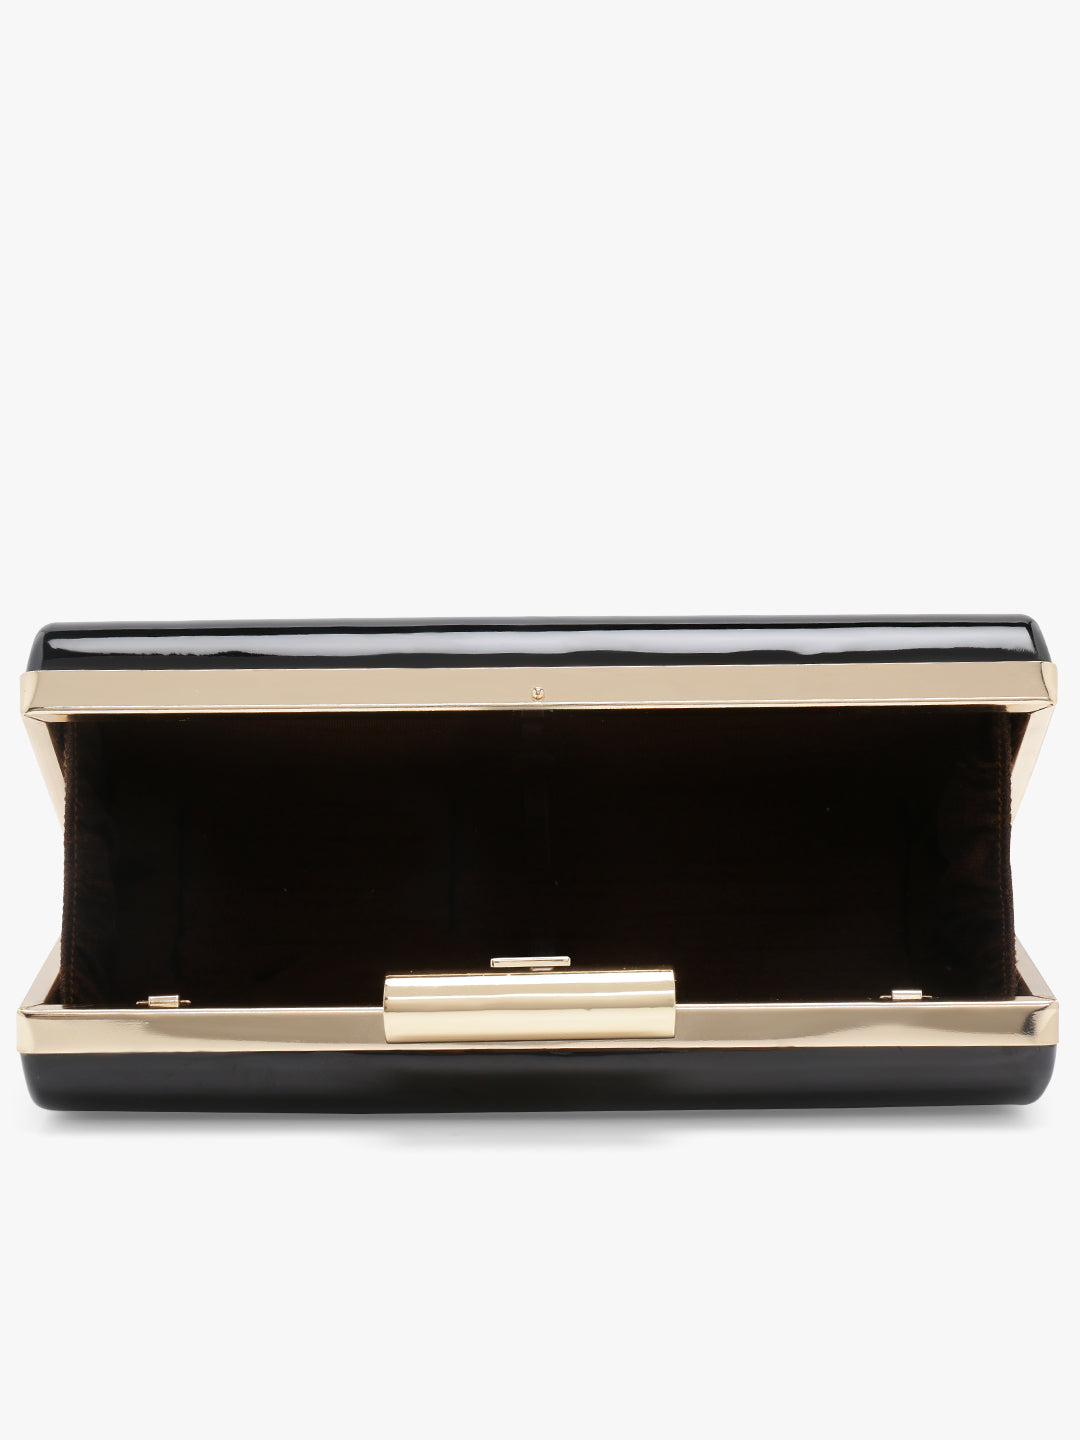 With its spacious interior and elegant design, our Glam Clutch effortlessly combines style and functionality, ensuring you make a statement wherever you go.